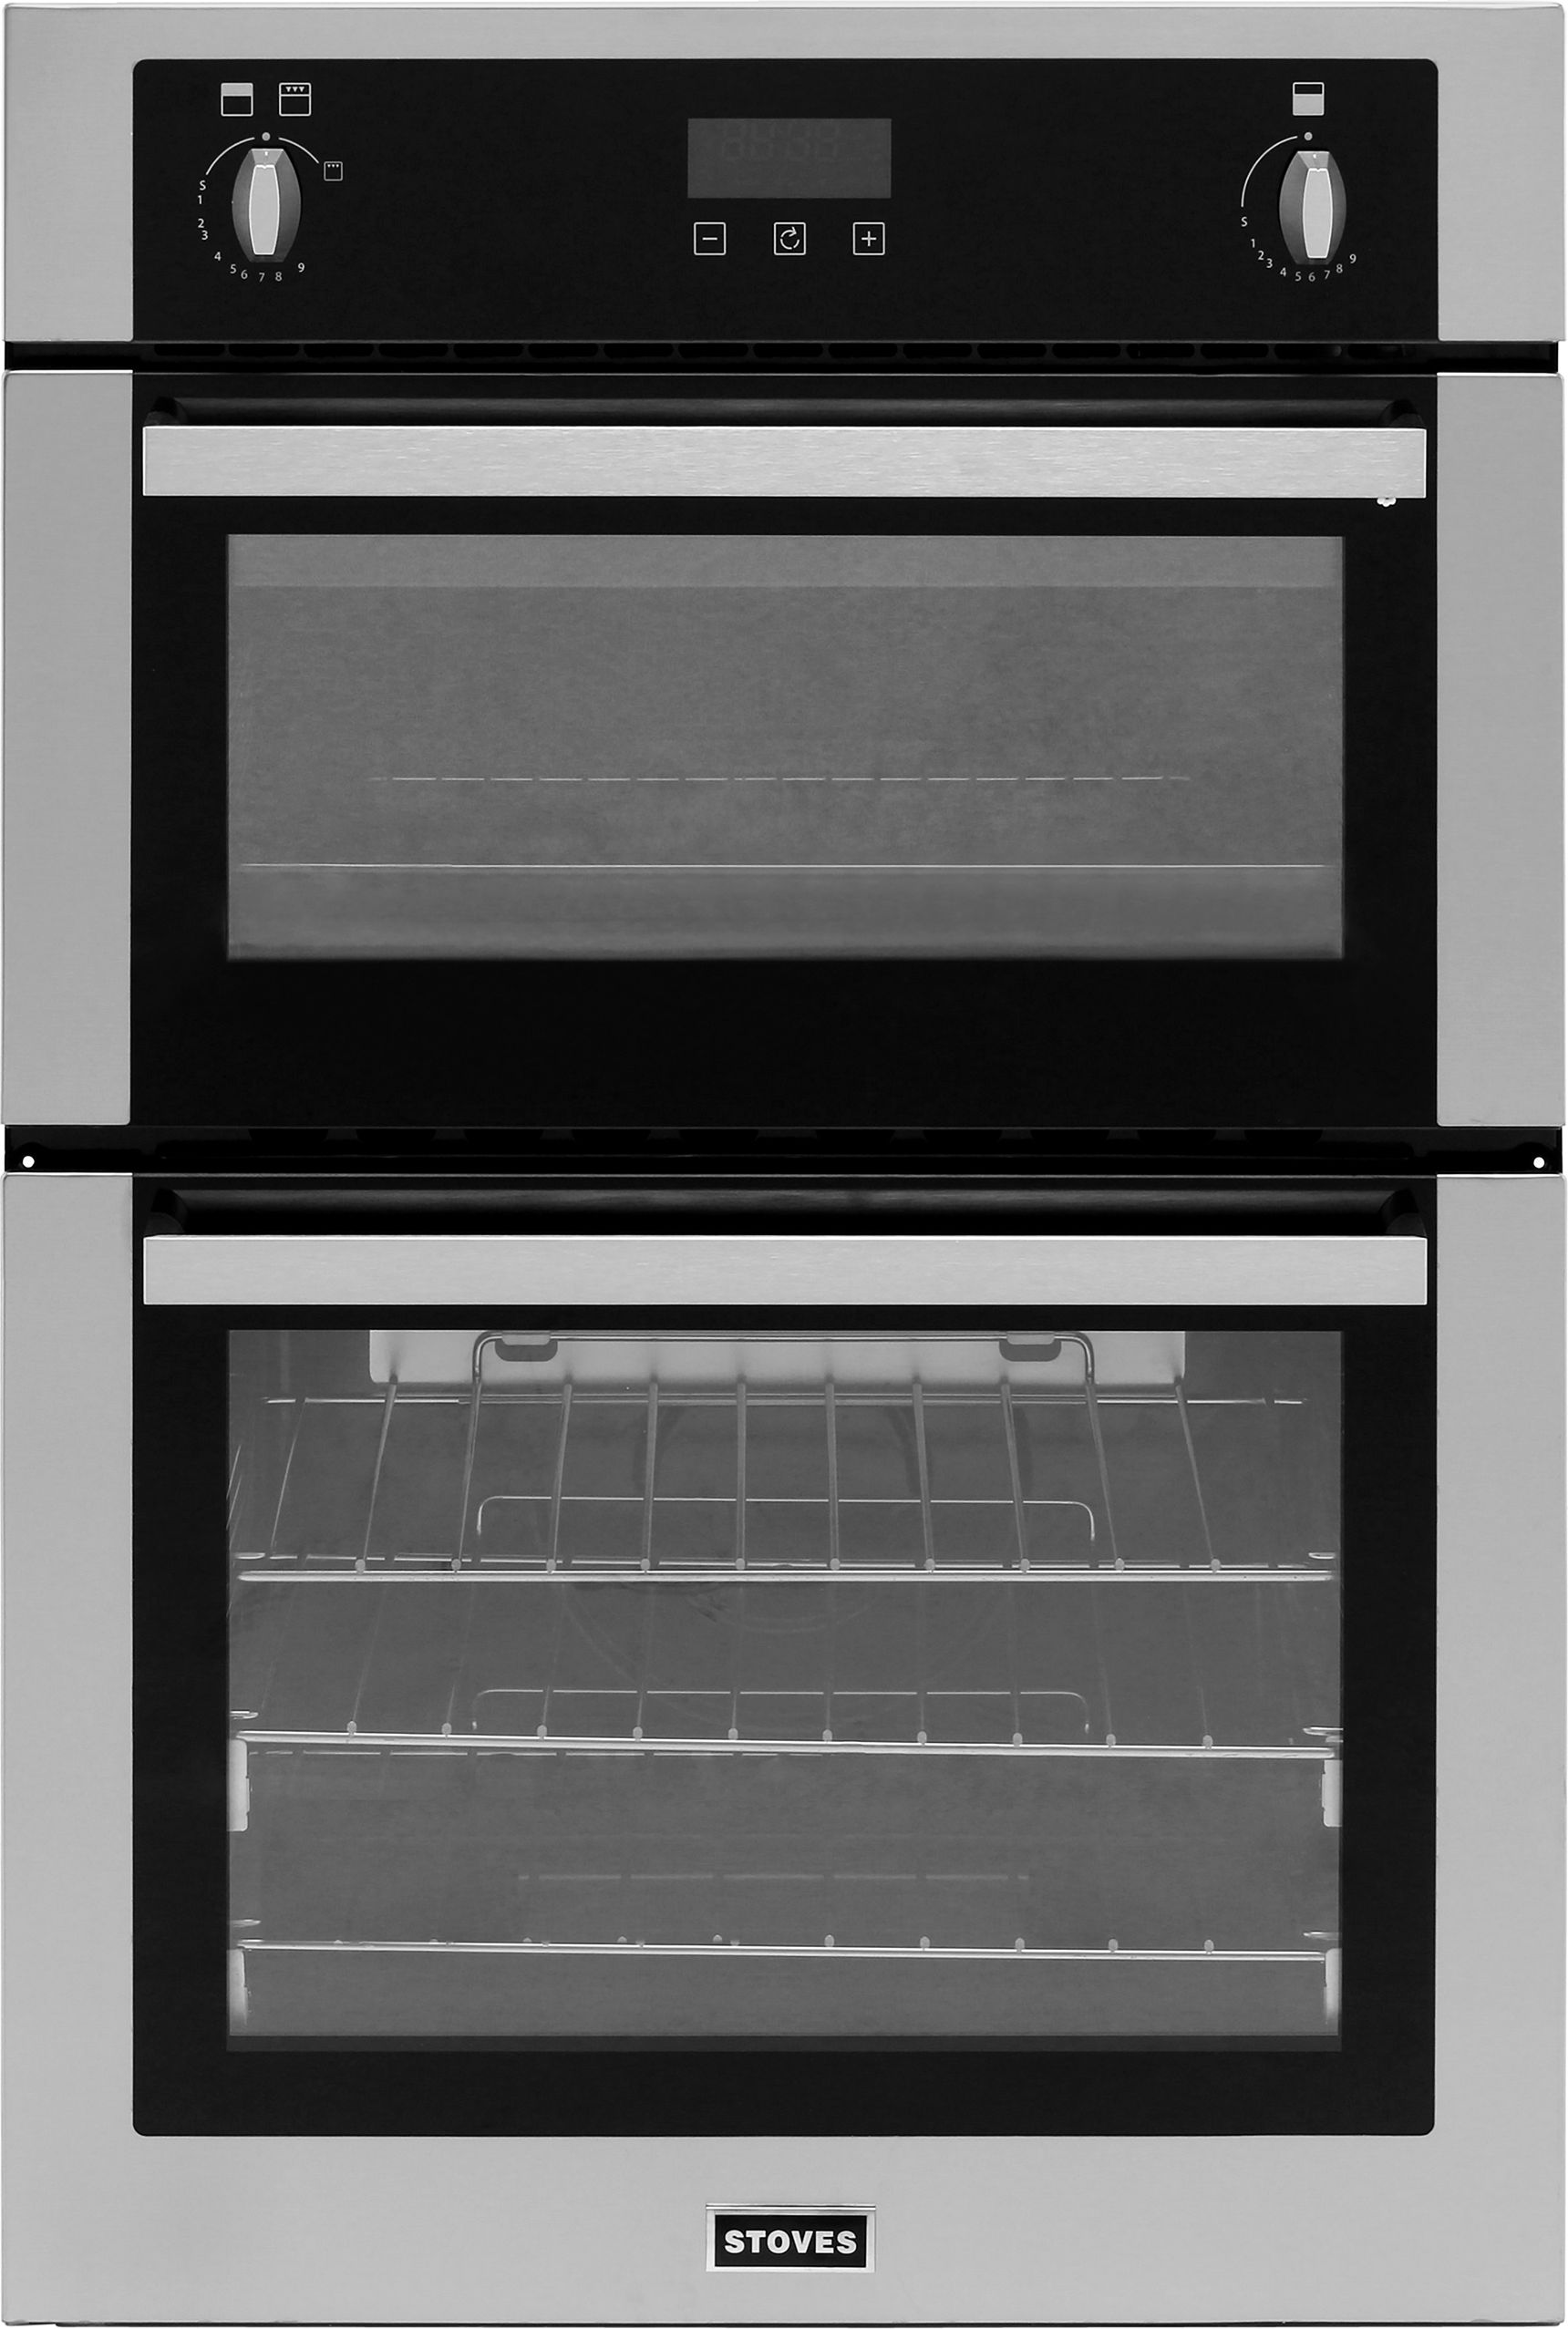 Stoves BI900G Built In Gas Double Oven with Full Width Electric Grill - Stainless Steel - A/A Rated, Stainless Steel